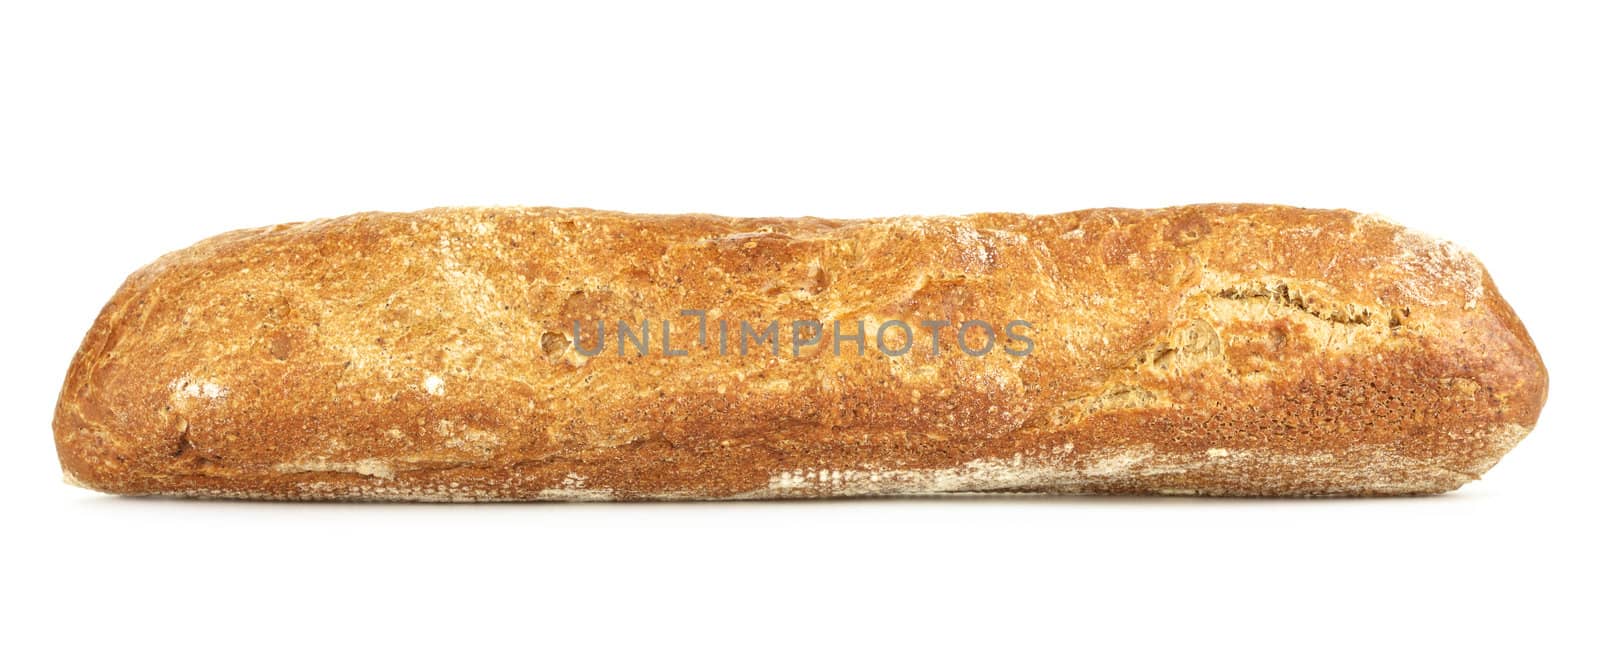 rye bread loaf isolated on white background